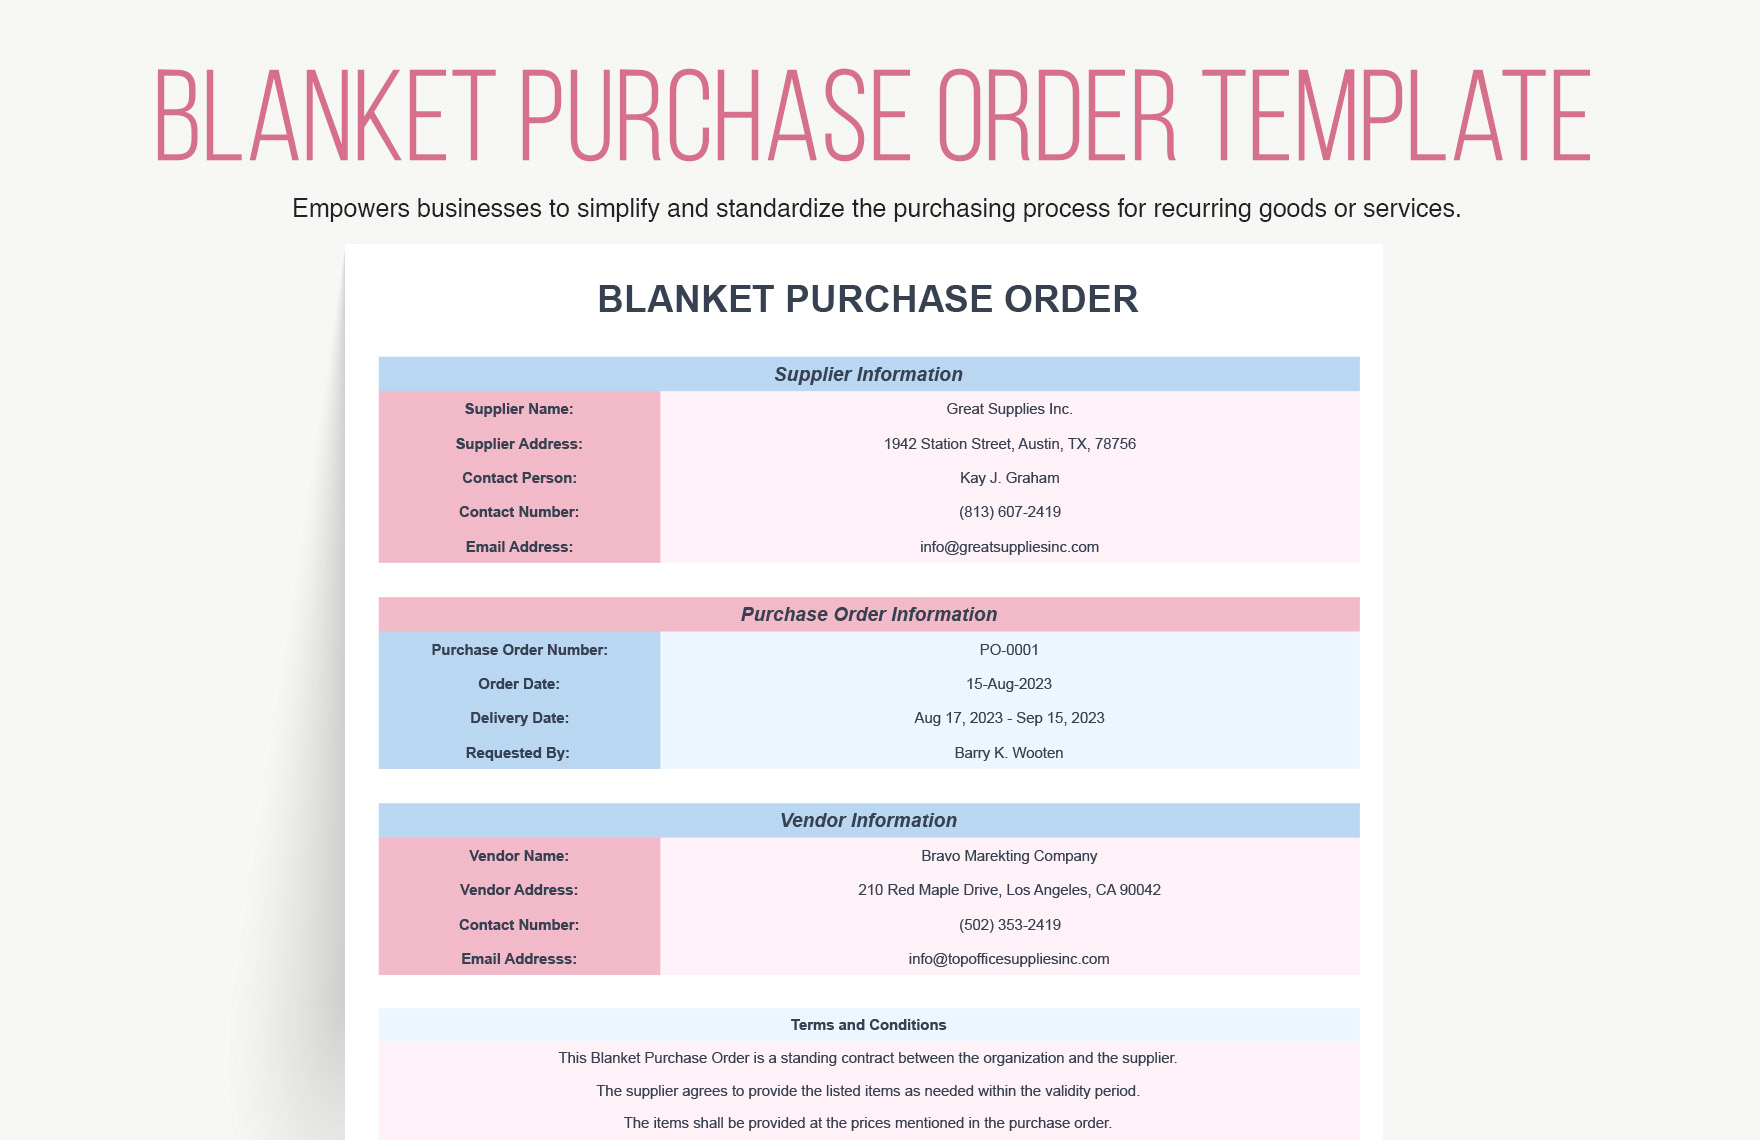 Blanket Purchase Order Template Download in Excel Google Sheets